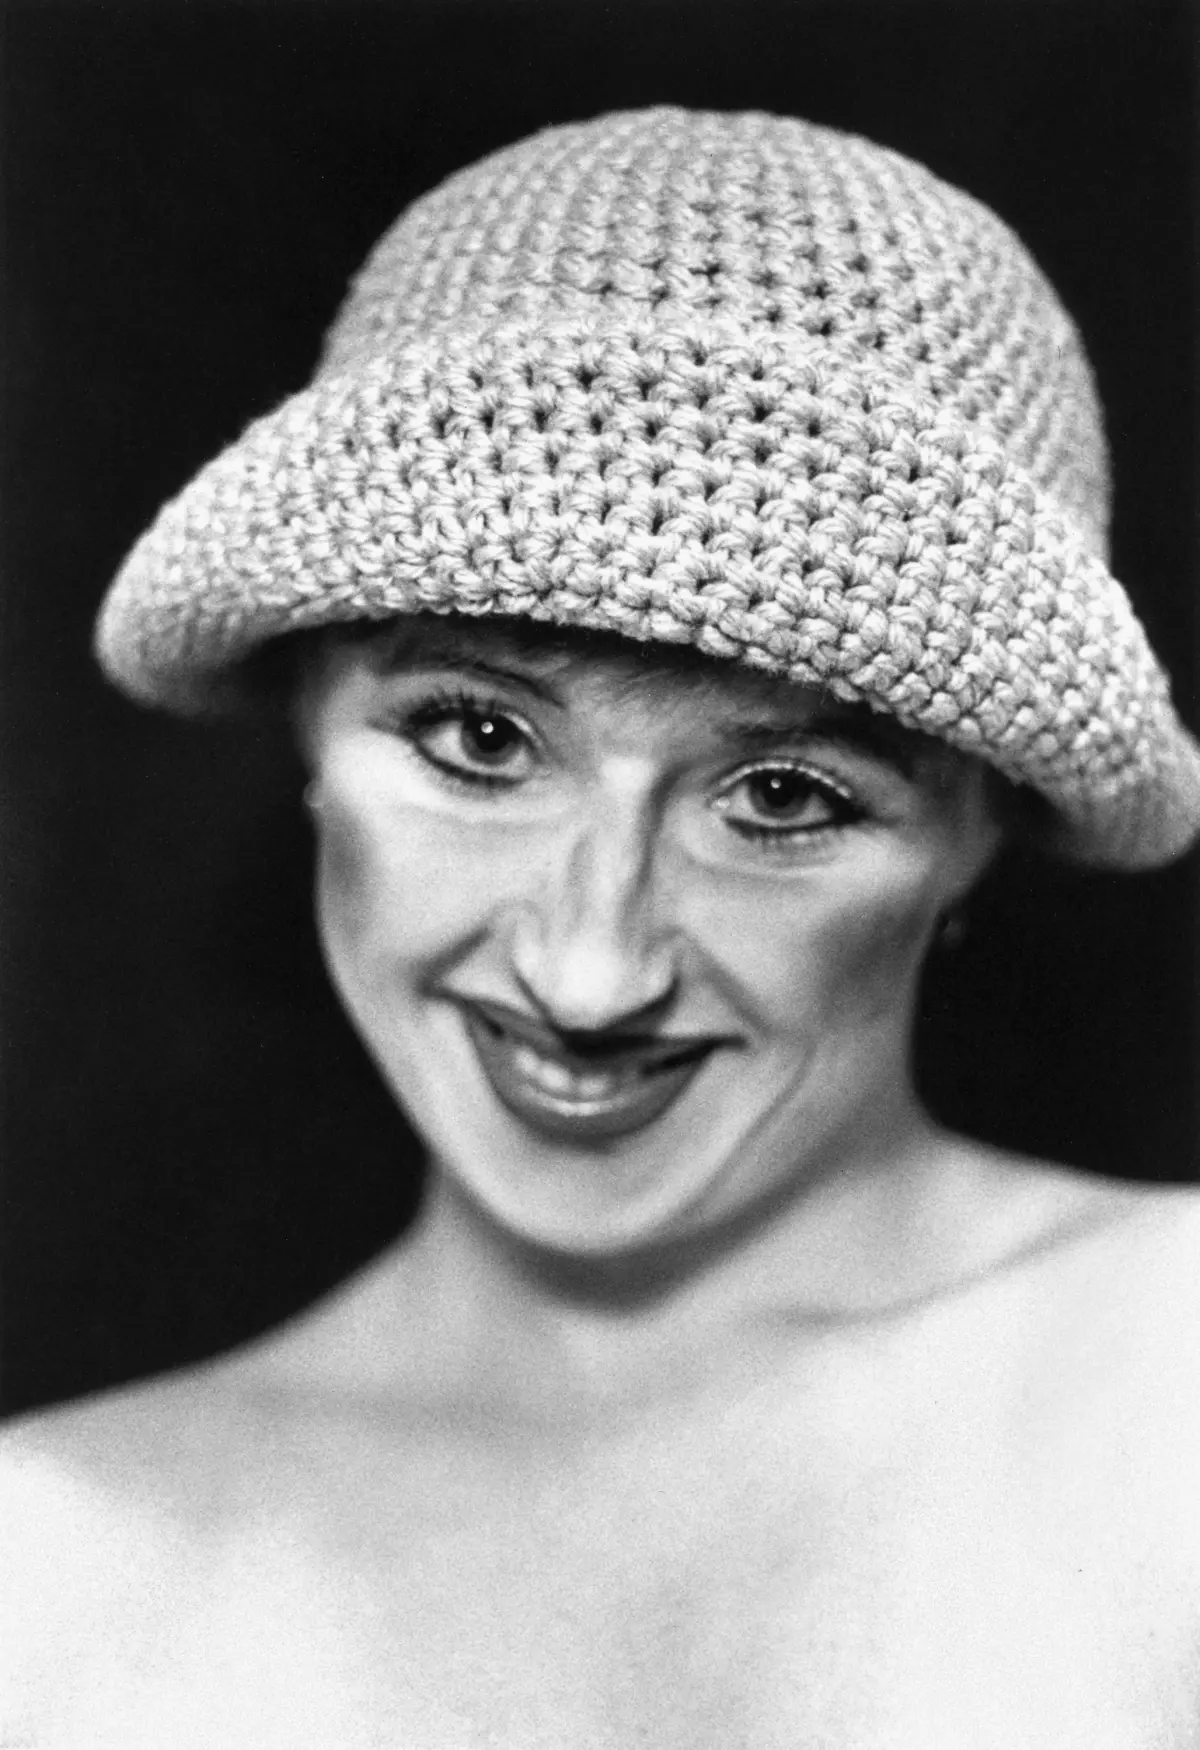 A portrait of a seemingly shirtless woman wearing heavy makeup with a particular focus on her crocheted hat